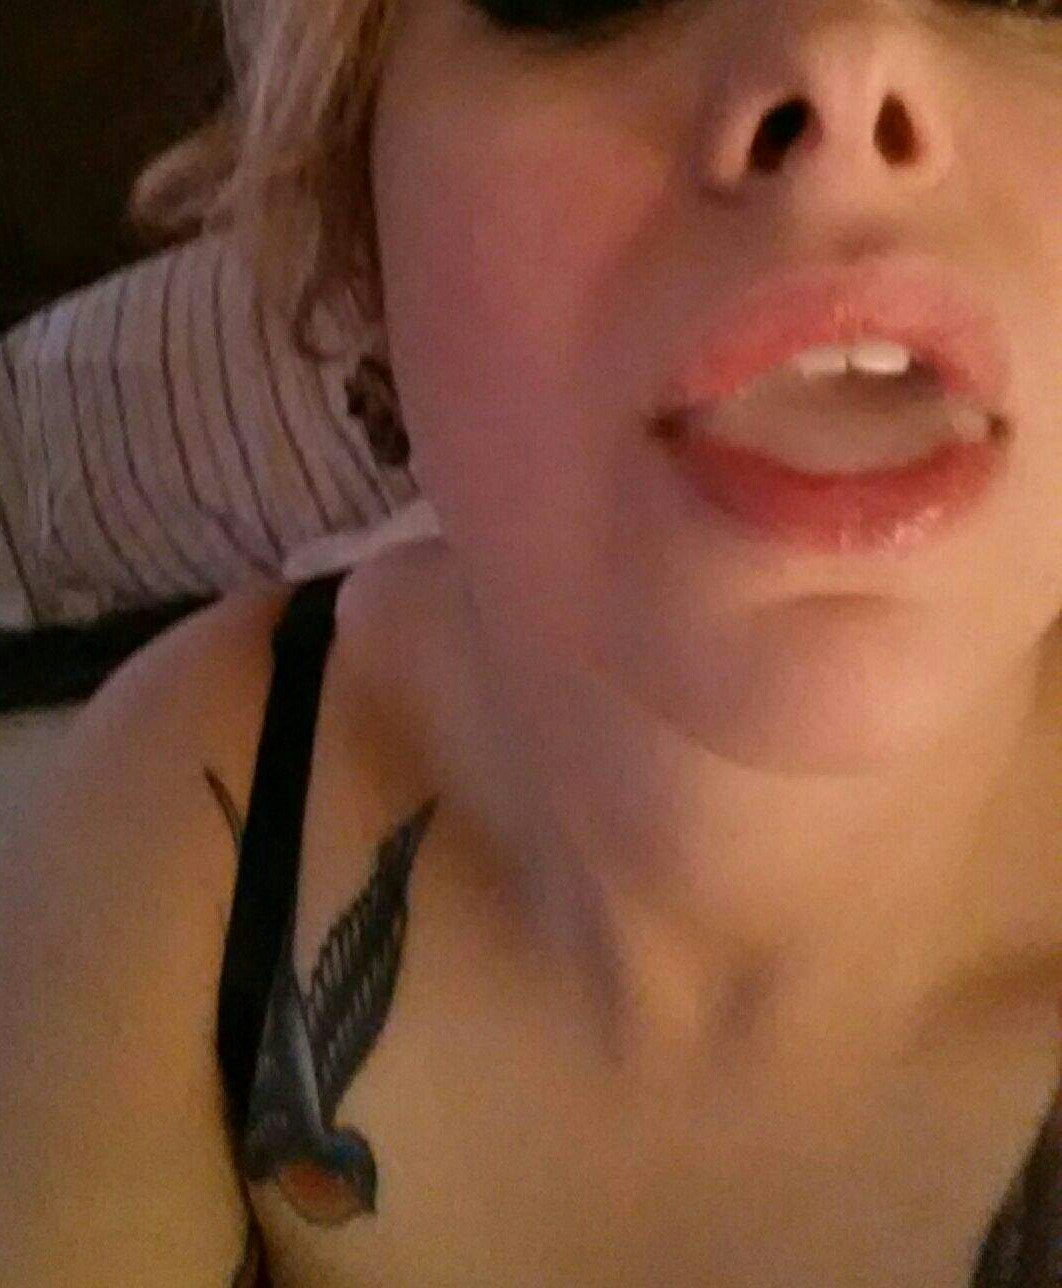 cumselfie:  My wife wanted to share some of her selfies.